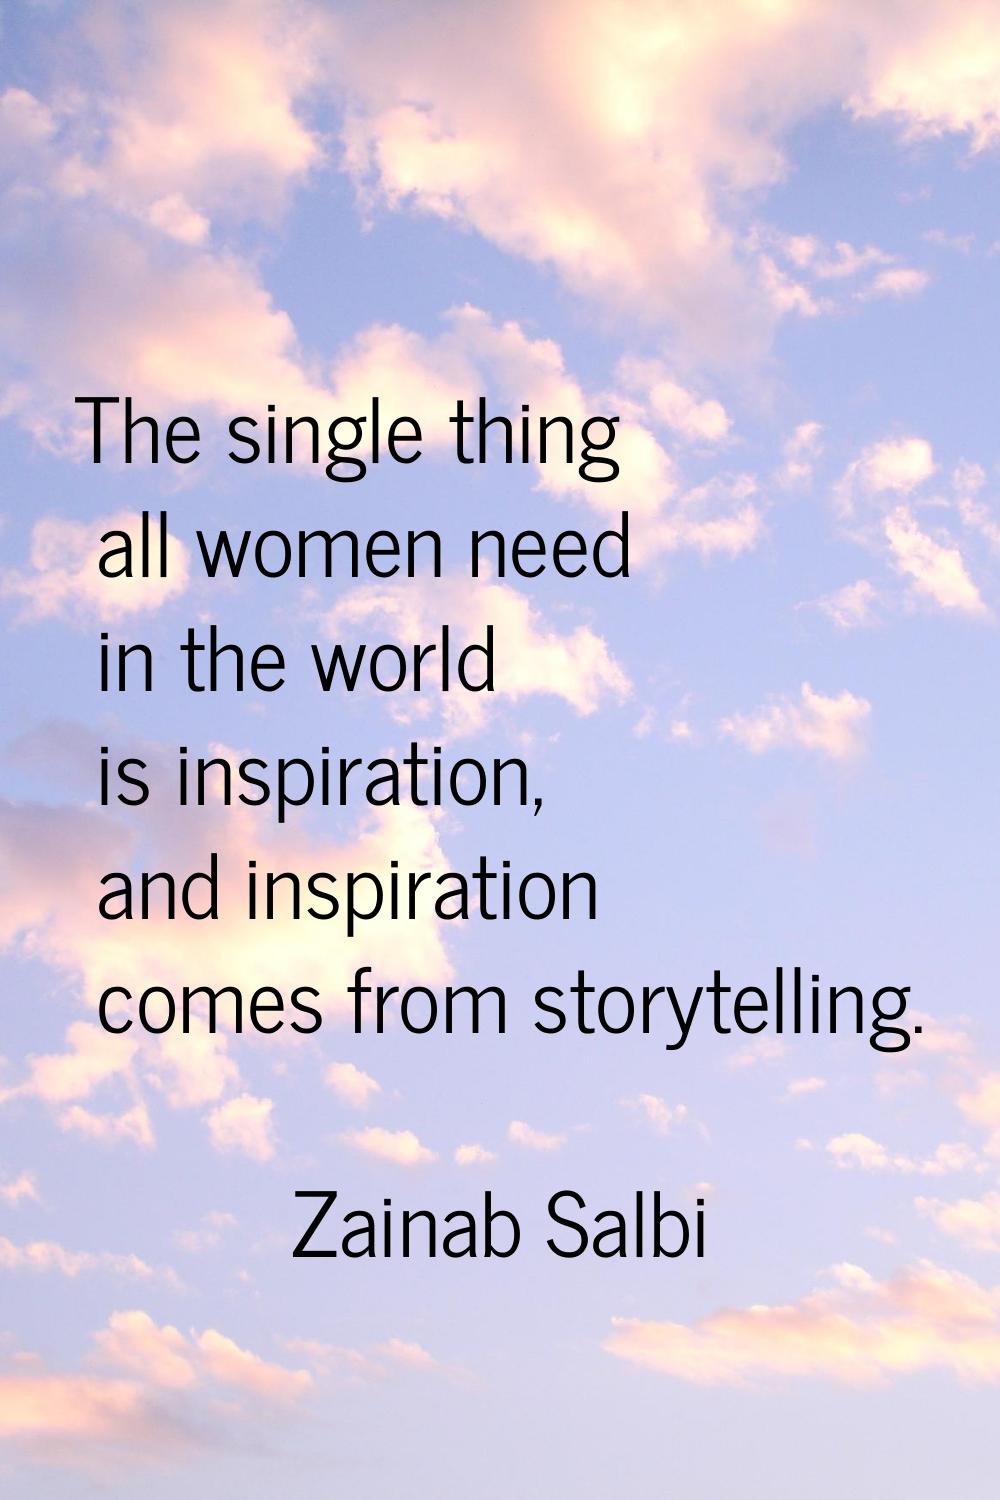 The single thing all women need in the world is inspiration, and inspiration comes from storytellin